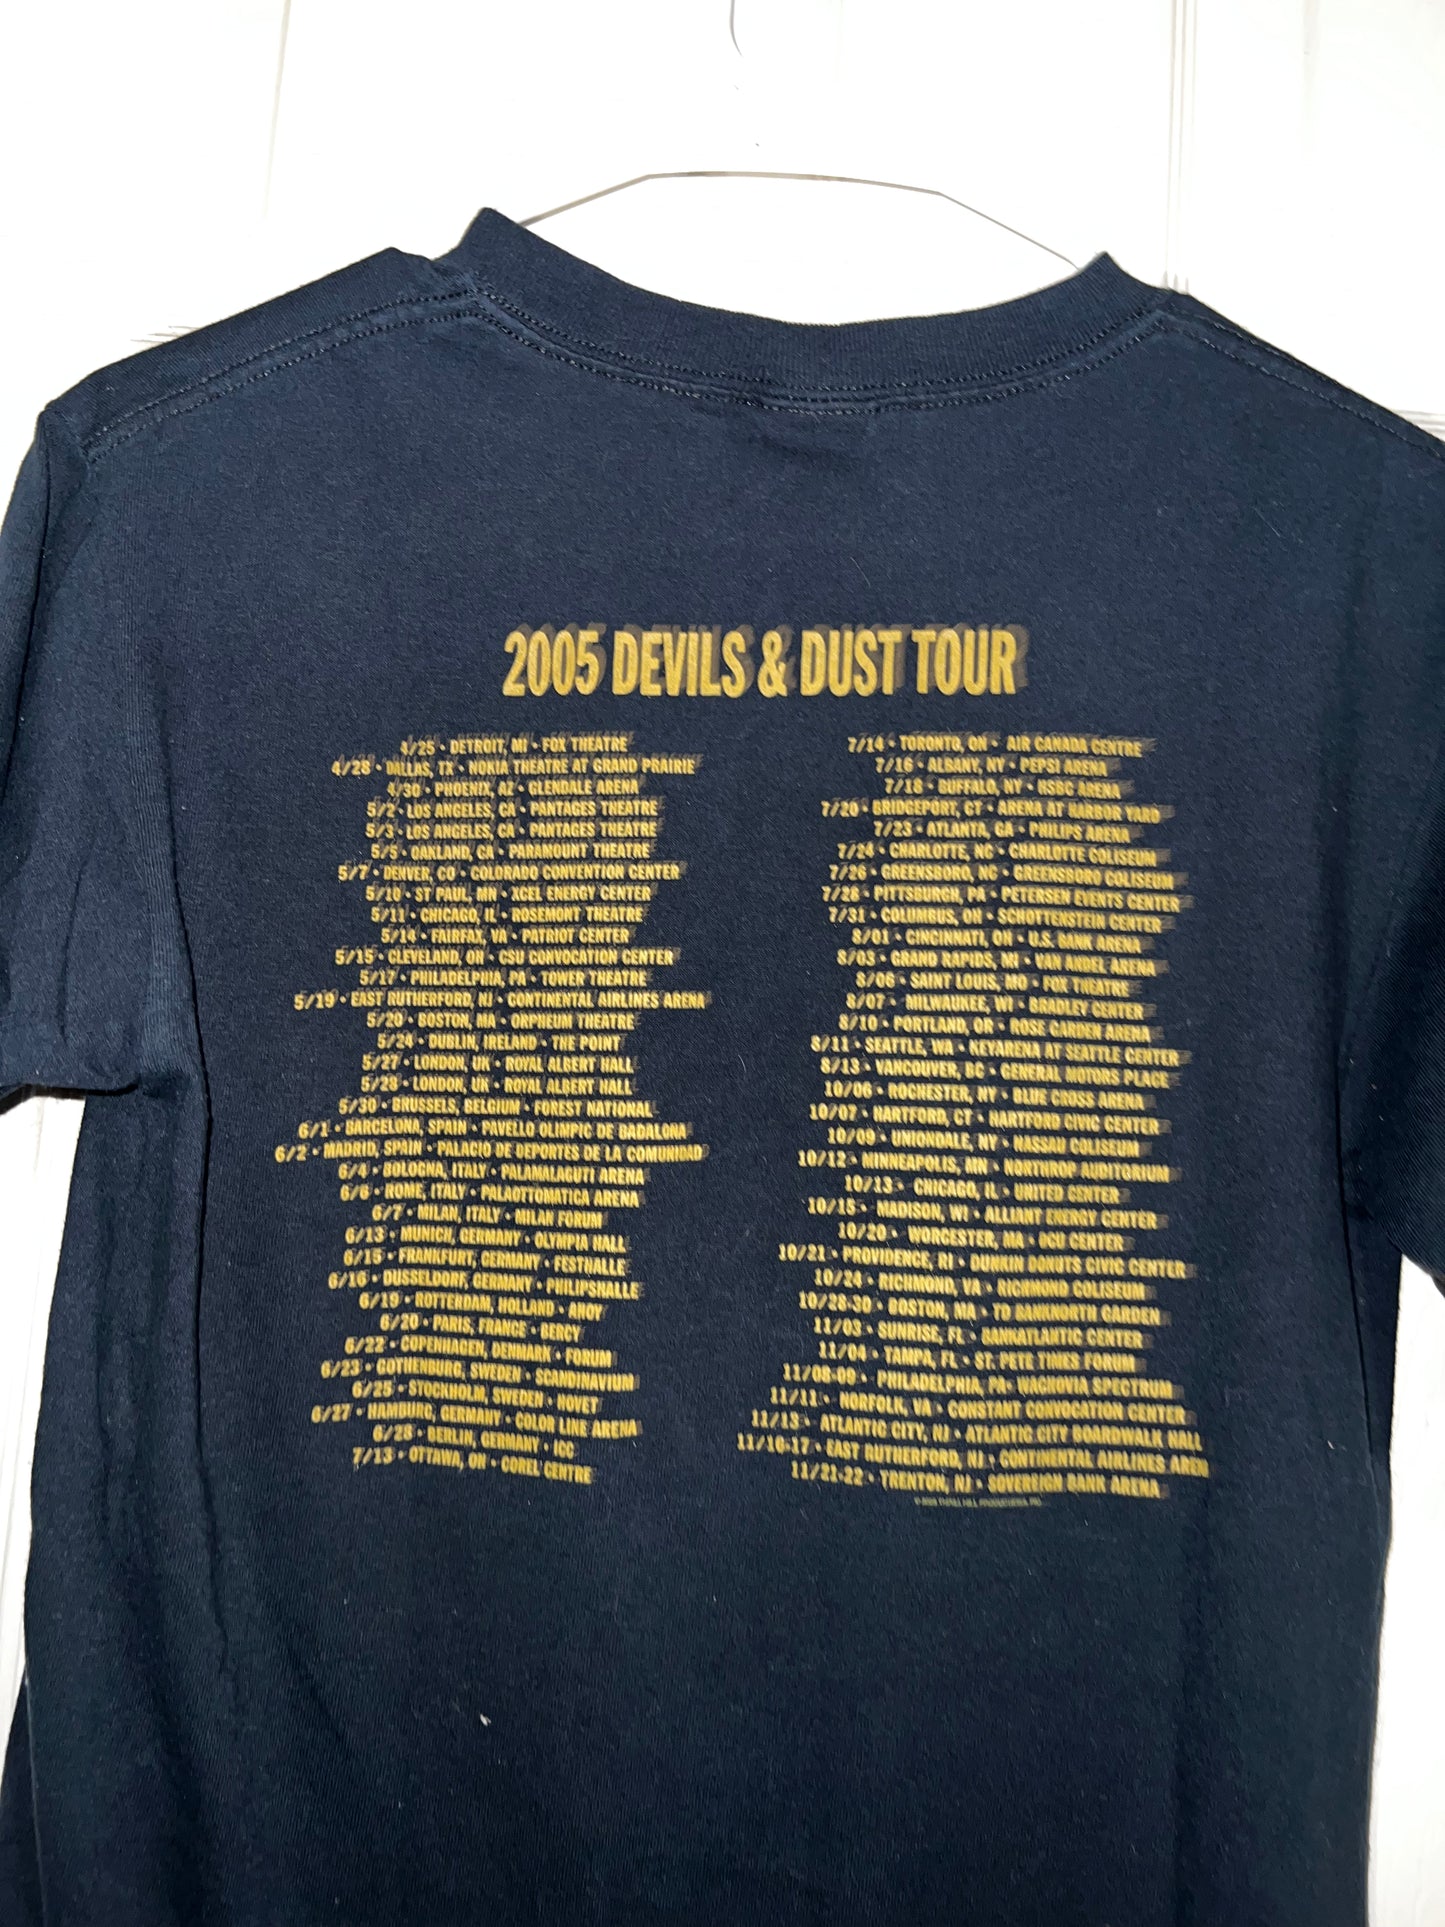 Bruce Springsteen Vintage Double Sided Oversized Tour Tee